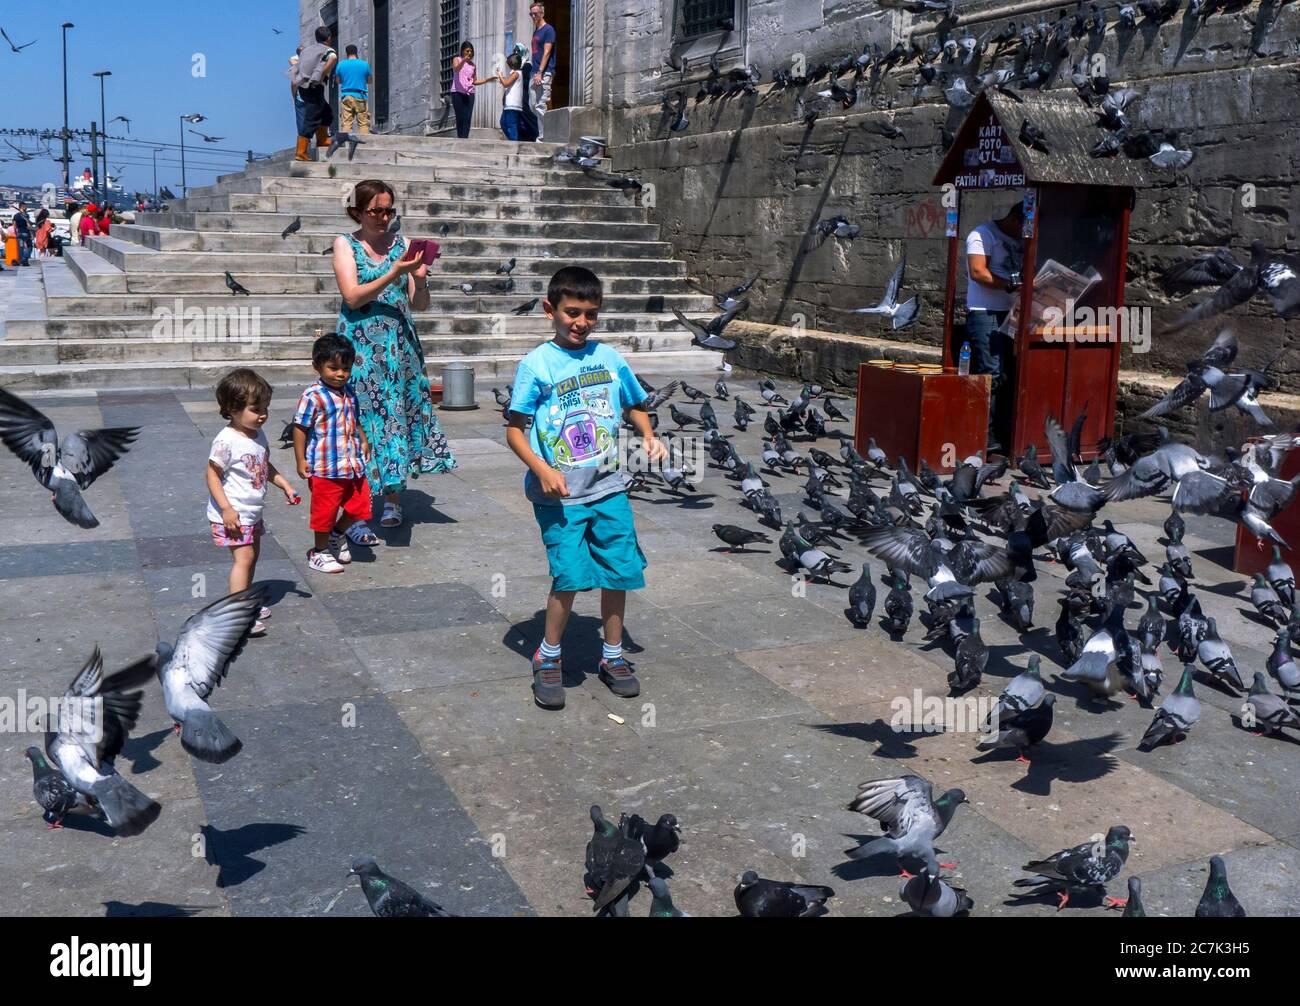 Children try to catch pigeons gathered next to the 400 year old Yeni Camii in the Eminonu district of Istanbul in Turkey. Stock Photo